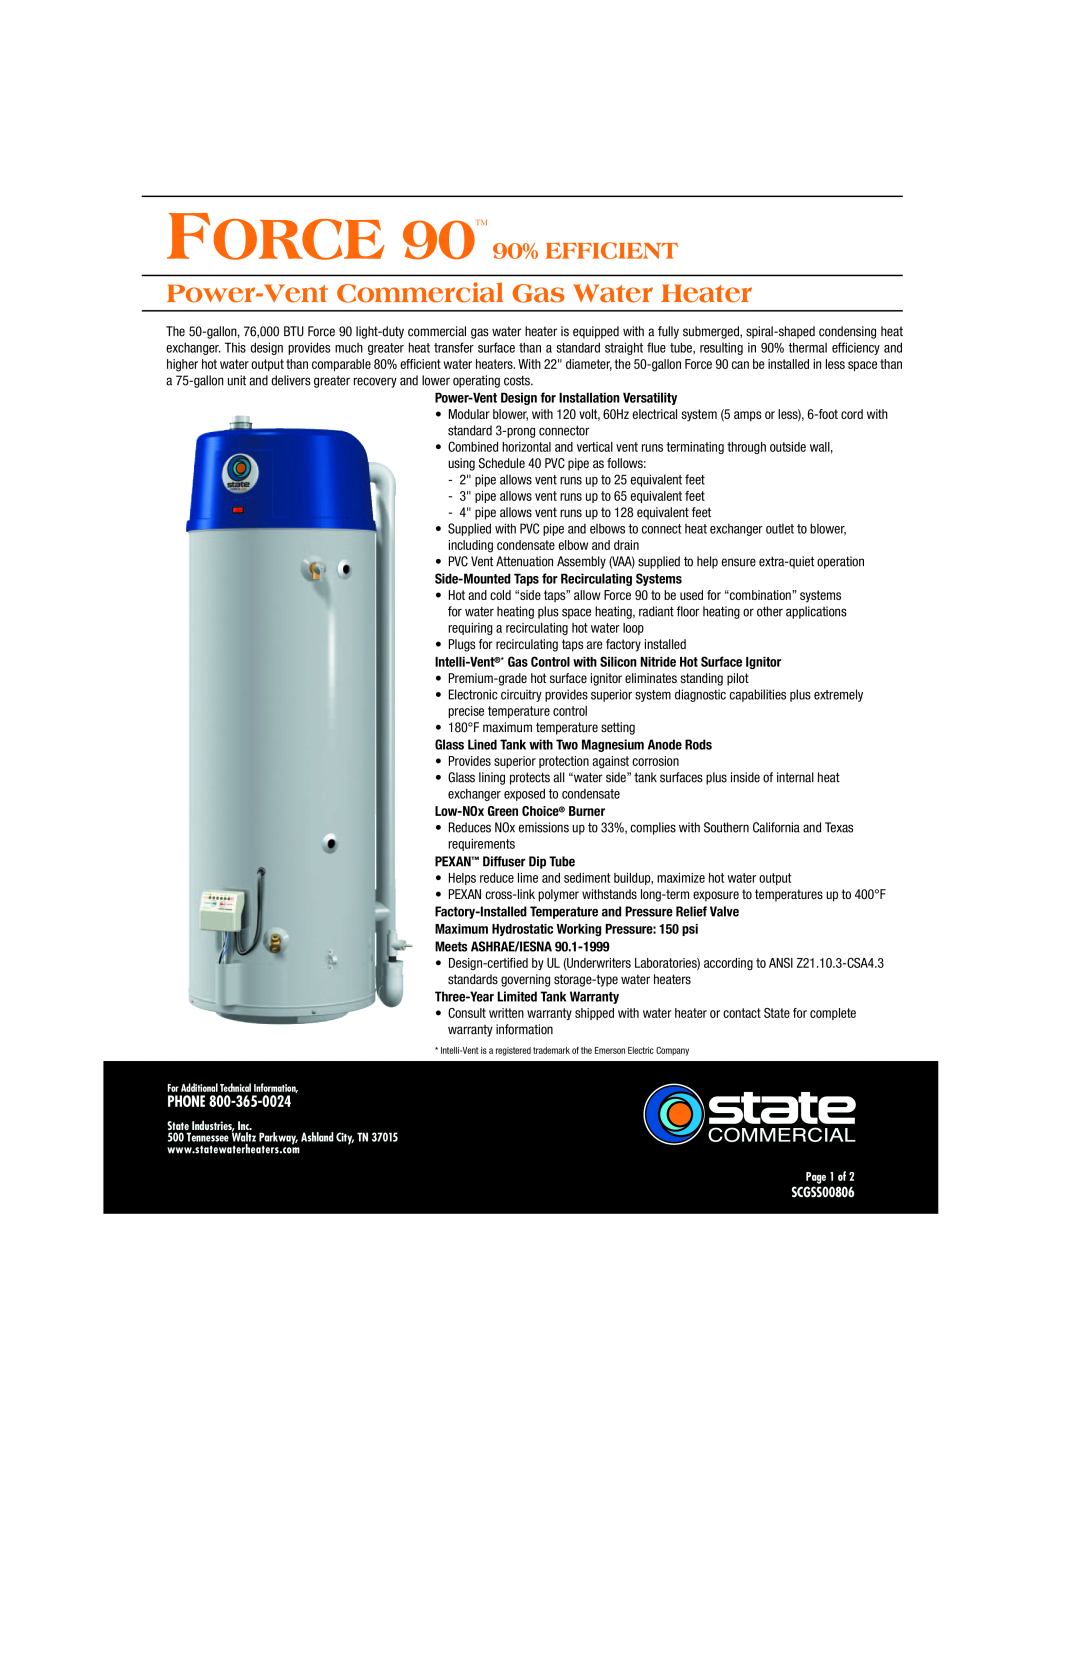 State Industries FORCE 90TM warranty Power-VentCommercial Gas Water Heater, FORCE 90 90% EFFICIENT, Phone, SCGSS00806 